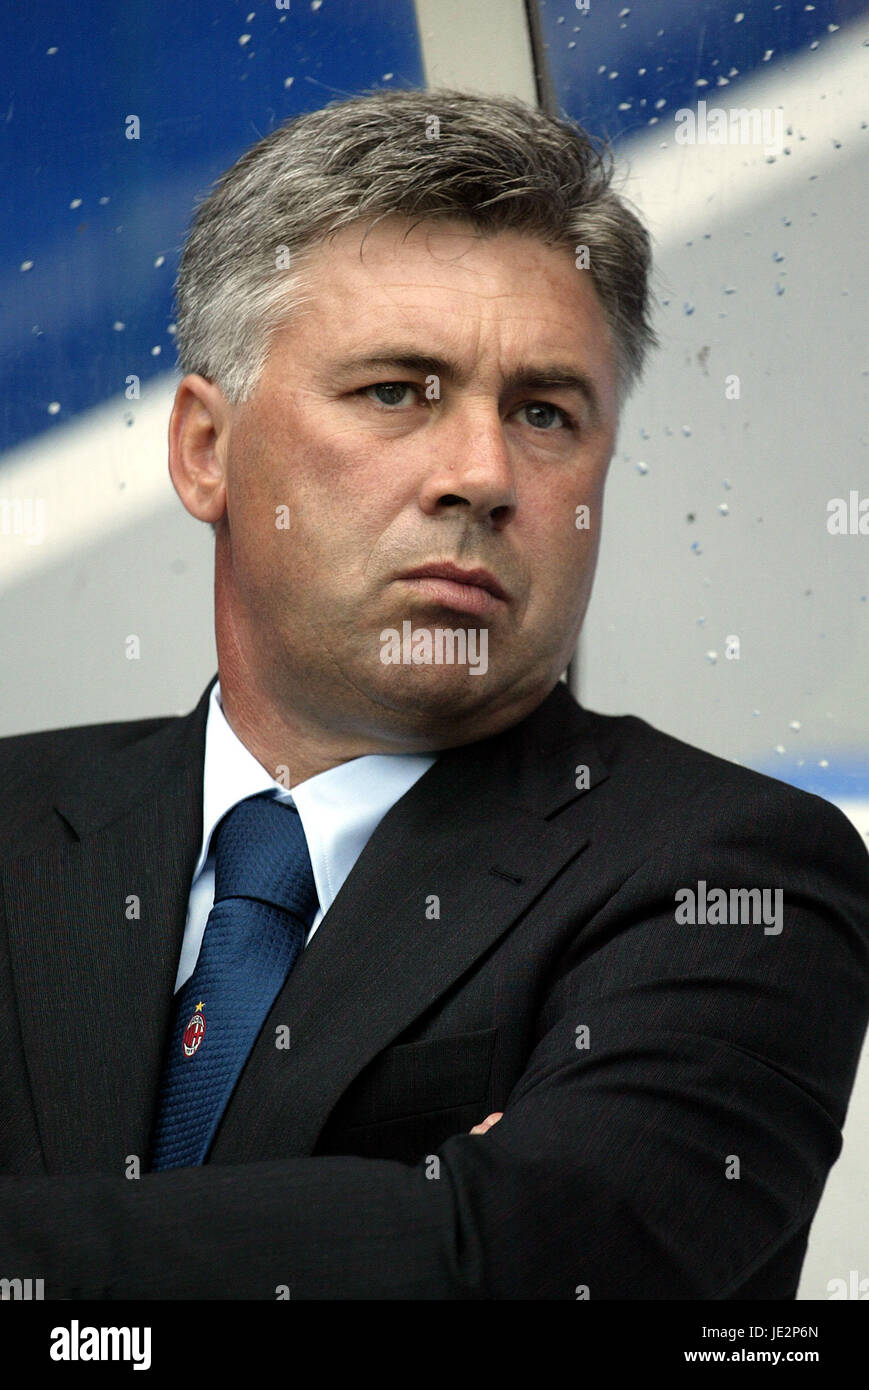 Coach carlo ancelotti hi-res stock photography and images - Alamy